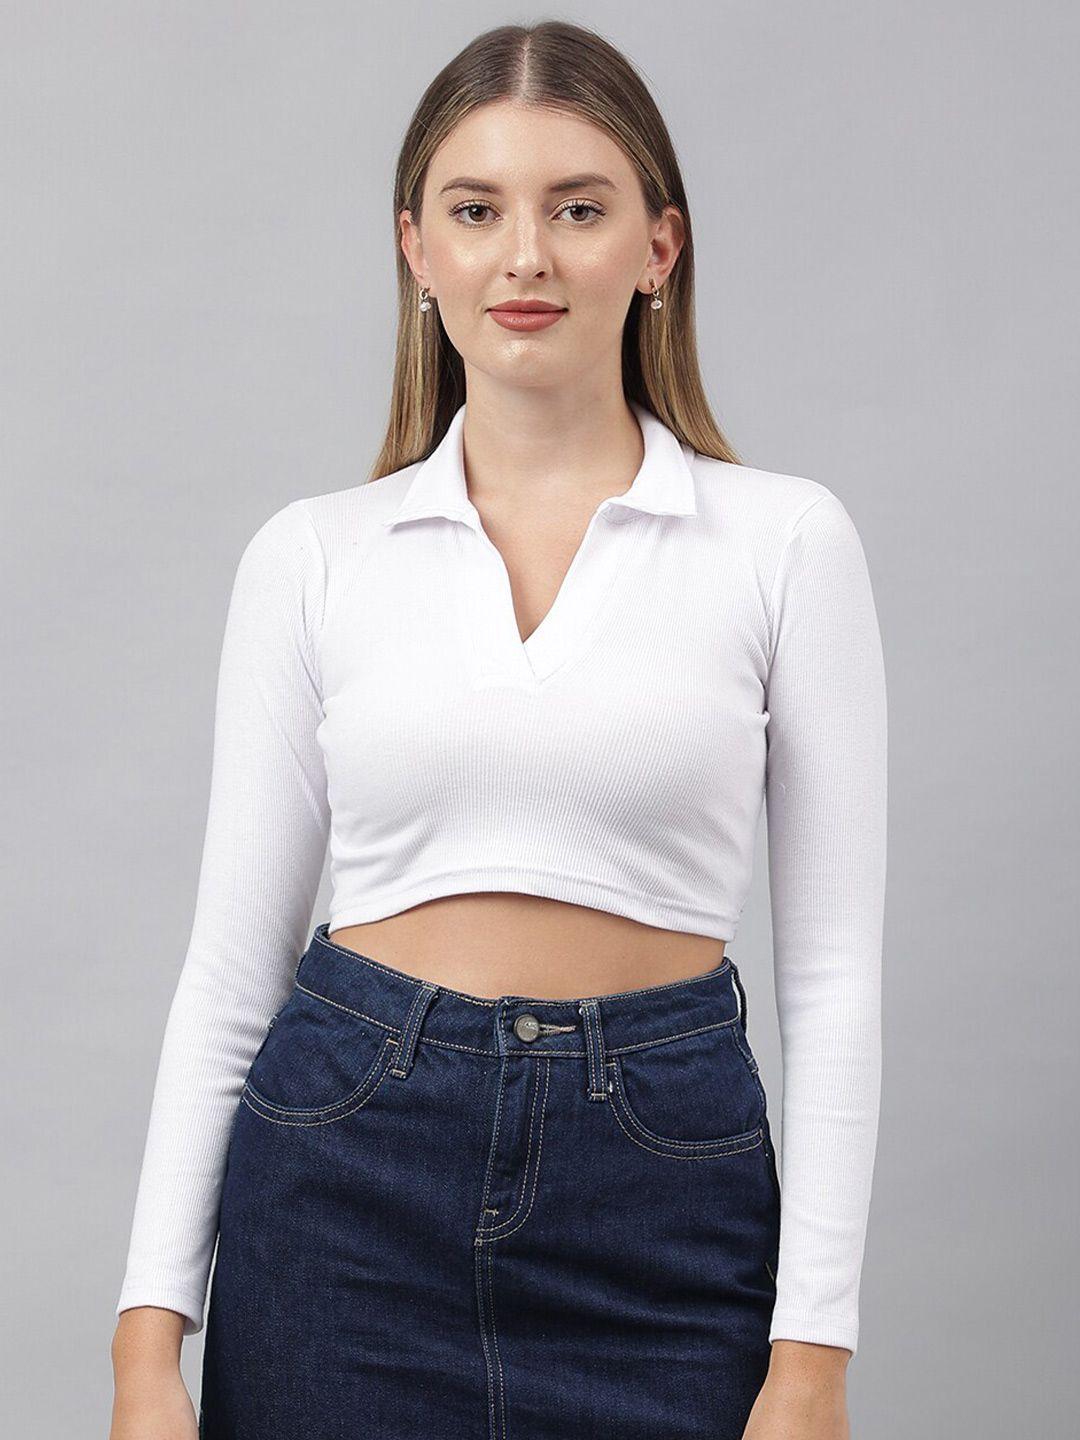 color-capital-shirt-collar-fitted-cotton-crop-top